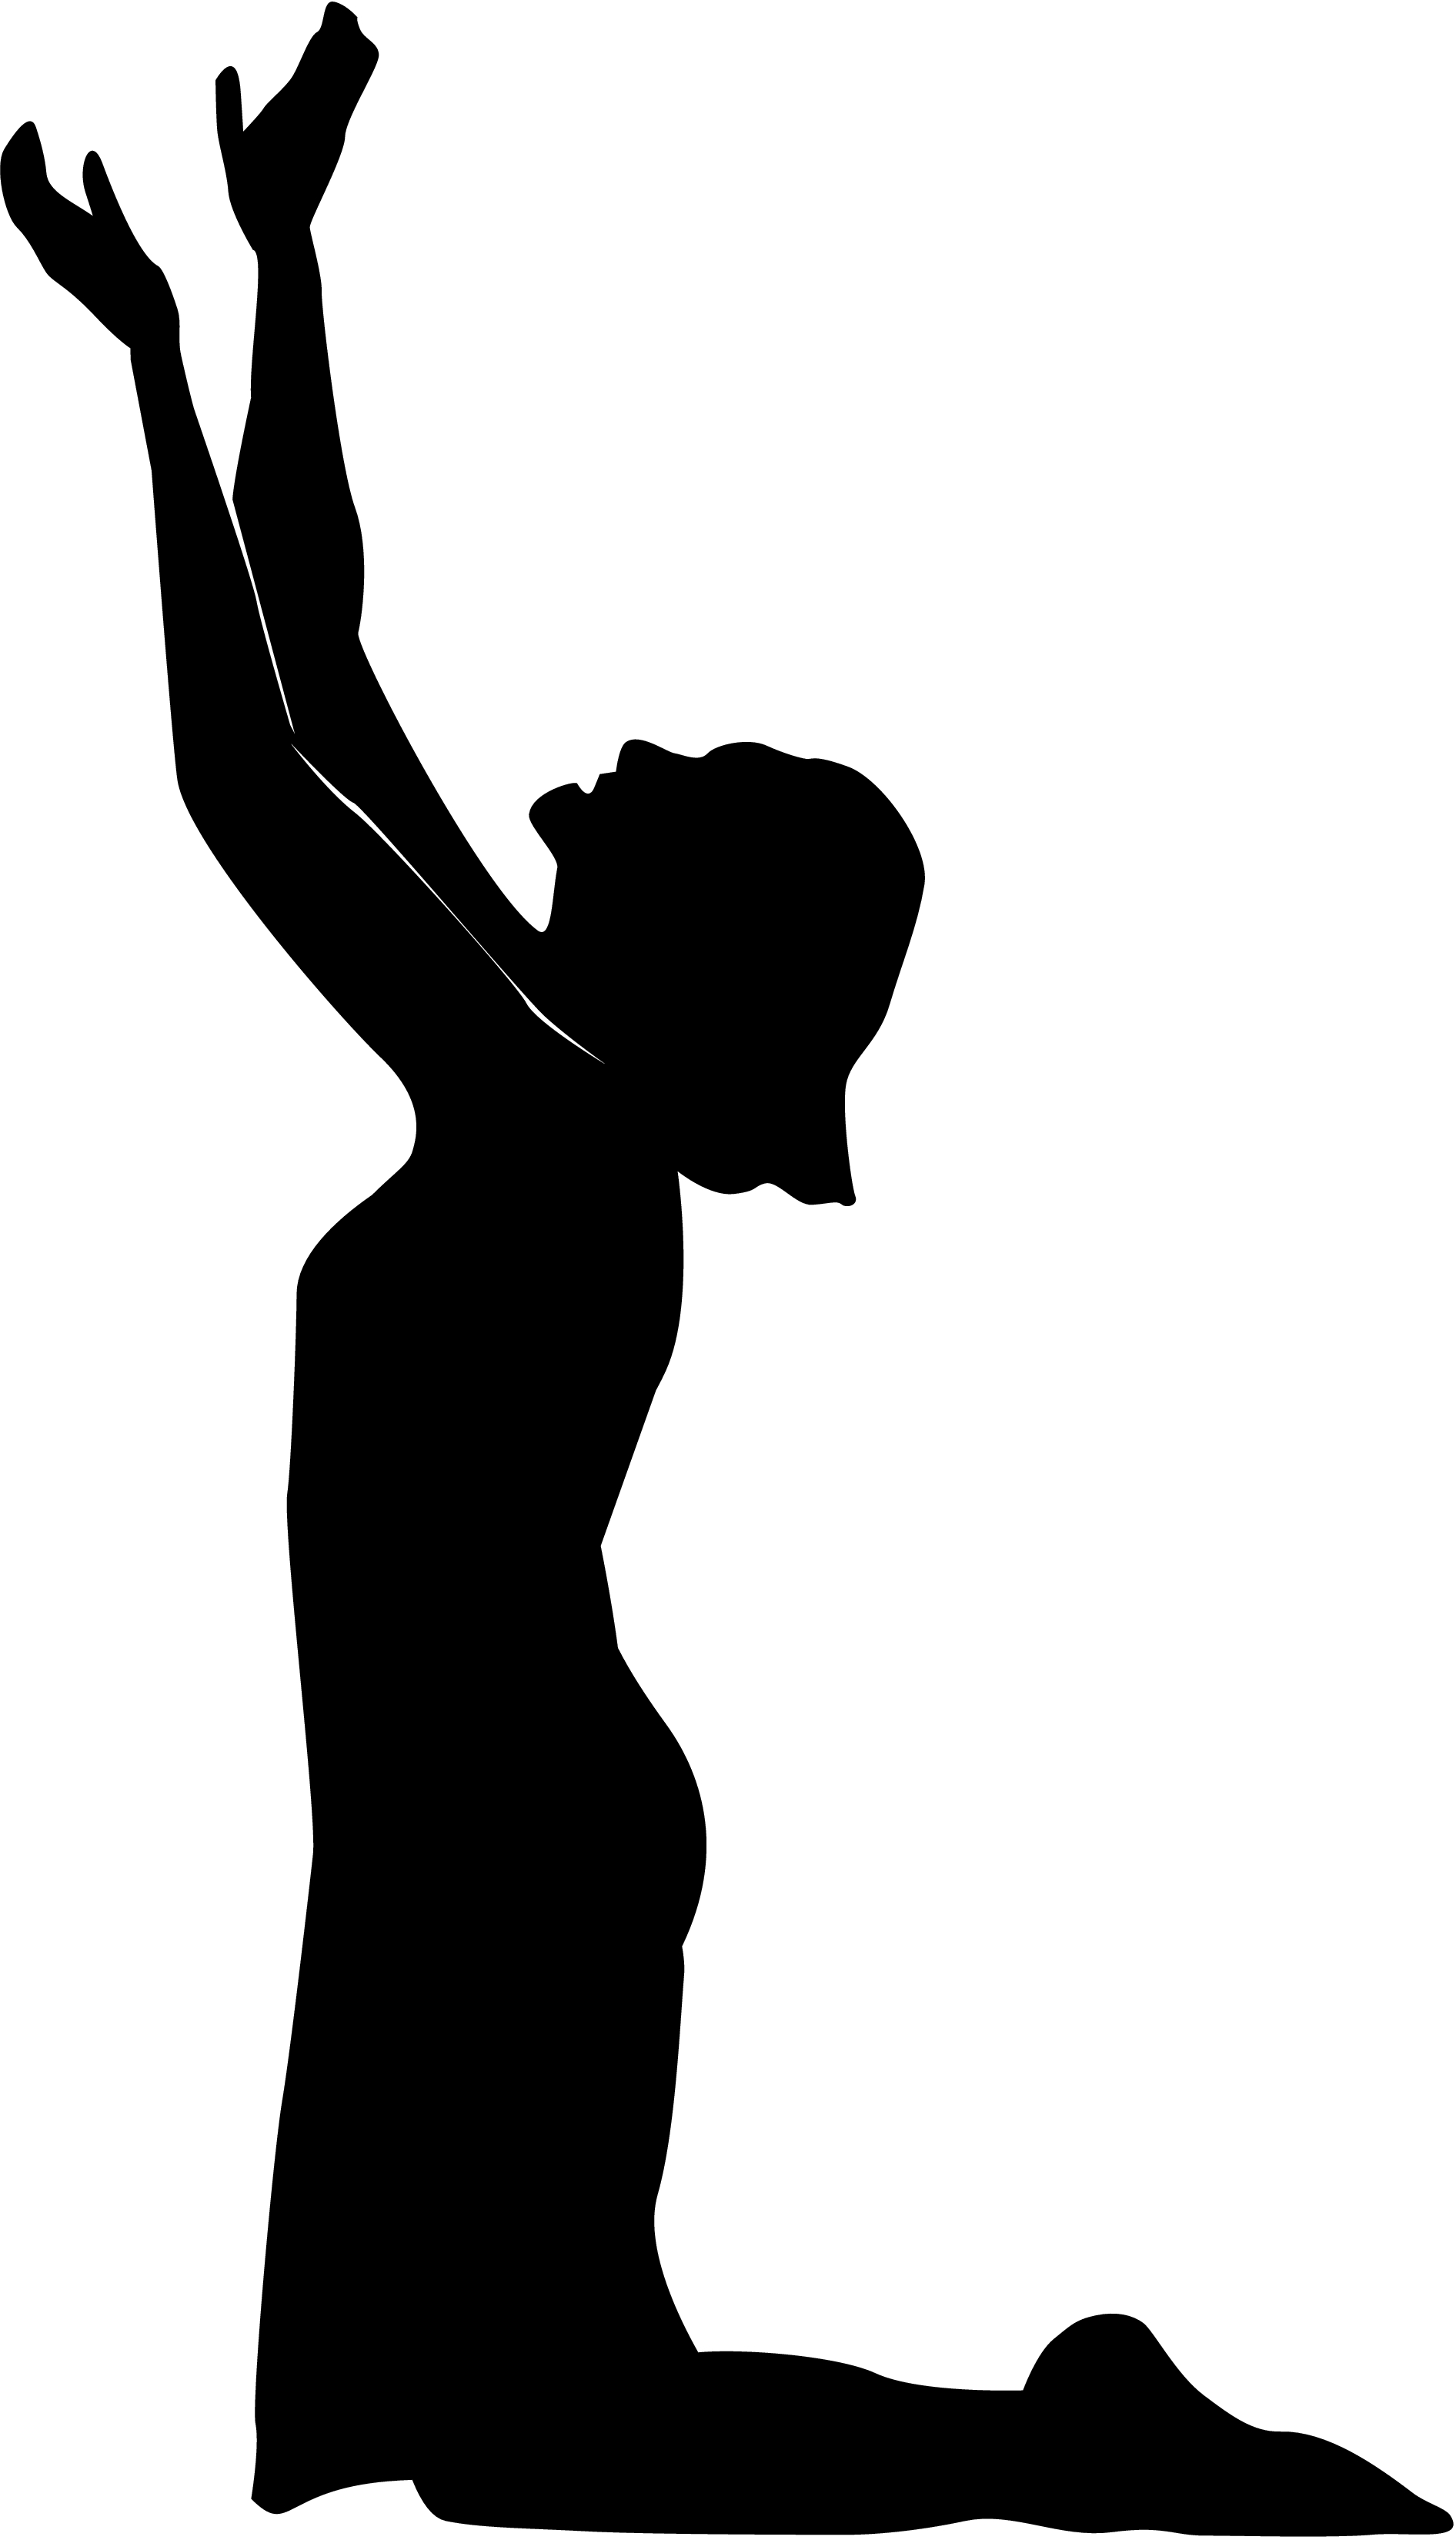 Crying woman silhouette clipart 